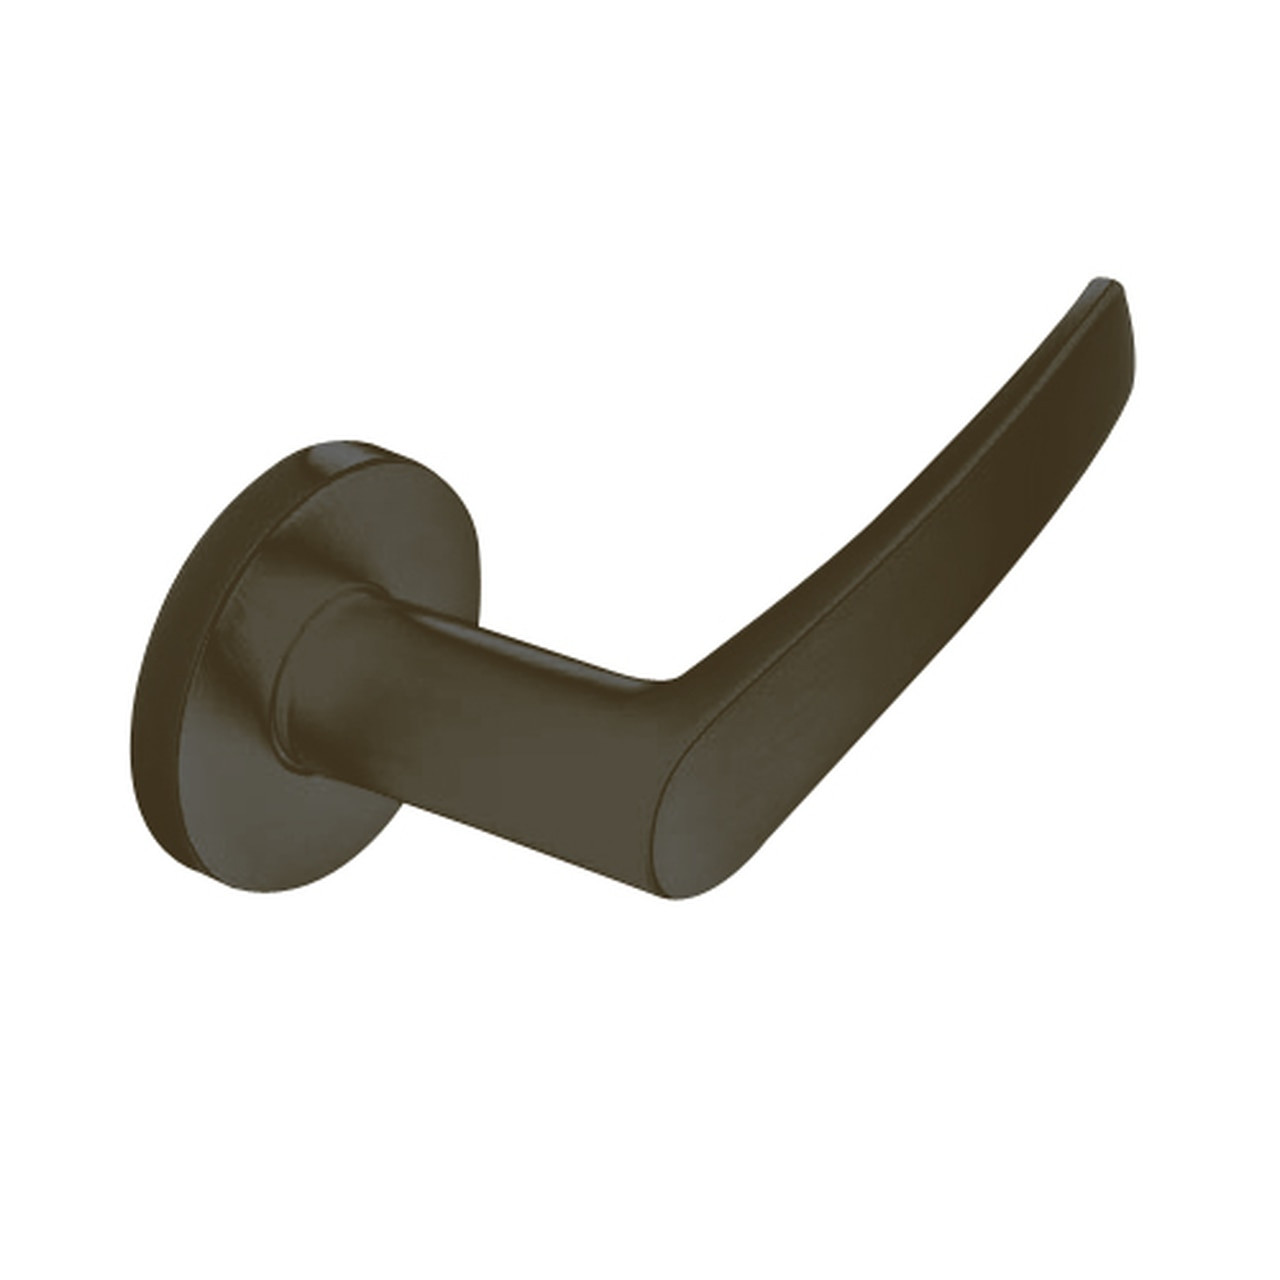 ML2022-ASB-613-LC Corbin Russwin ML2000 Series Mortise Store Door Locksets with Armstrong Lever with Deadbolt in Oil Rubbed Bronze